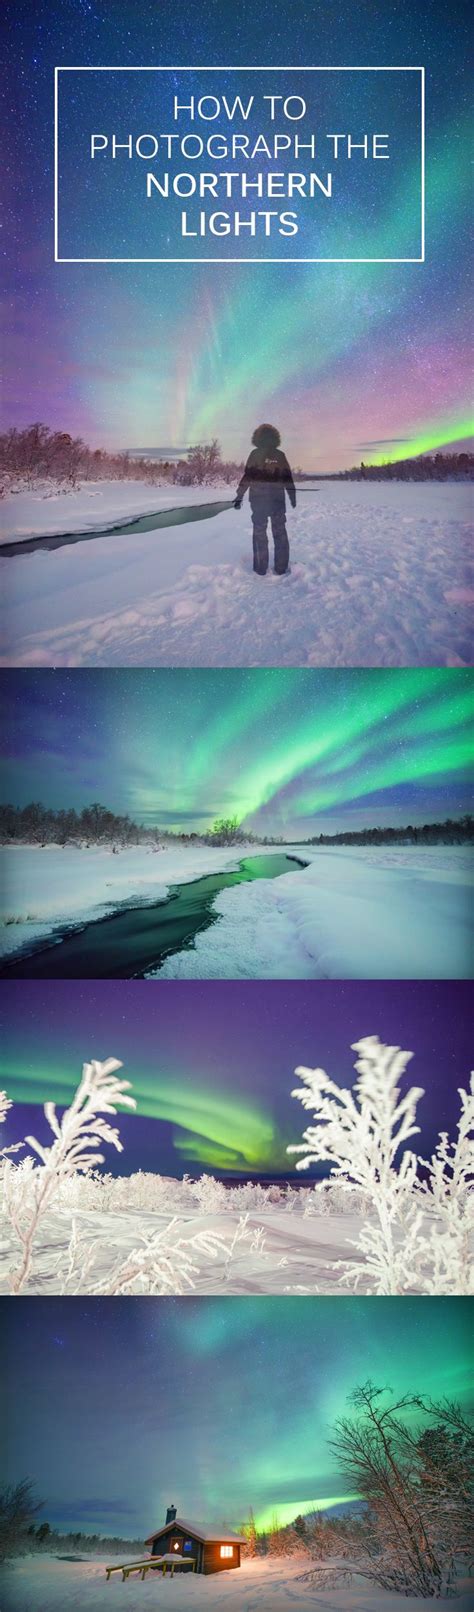 How To Photograph The Northern Lights Northern Lights Photo Travel